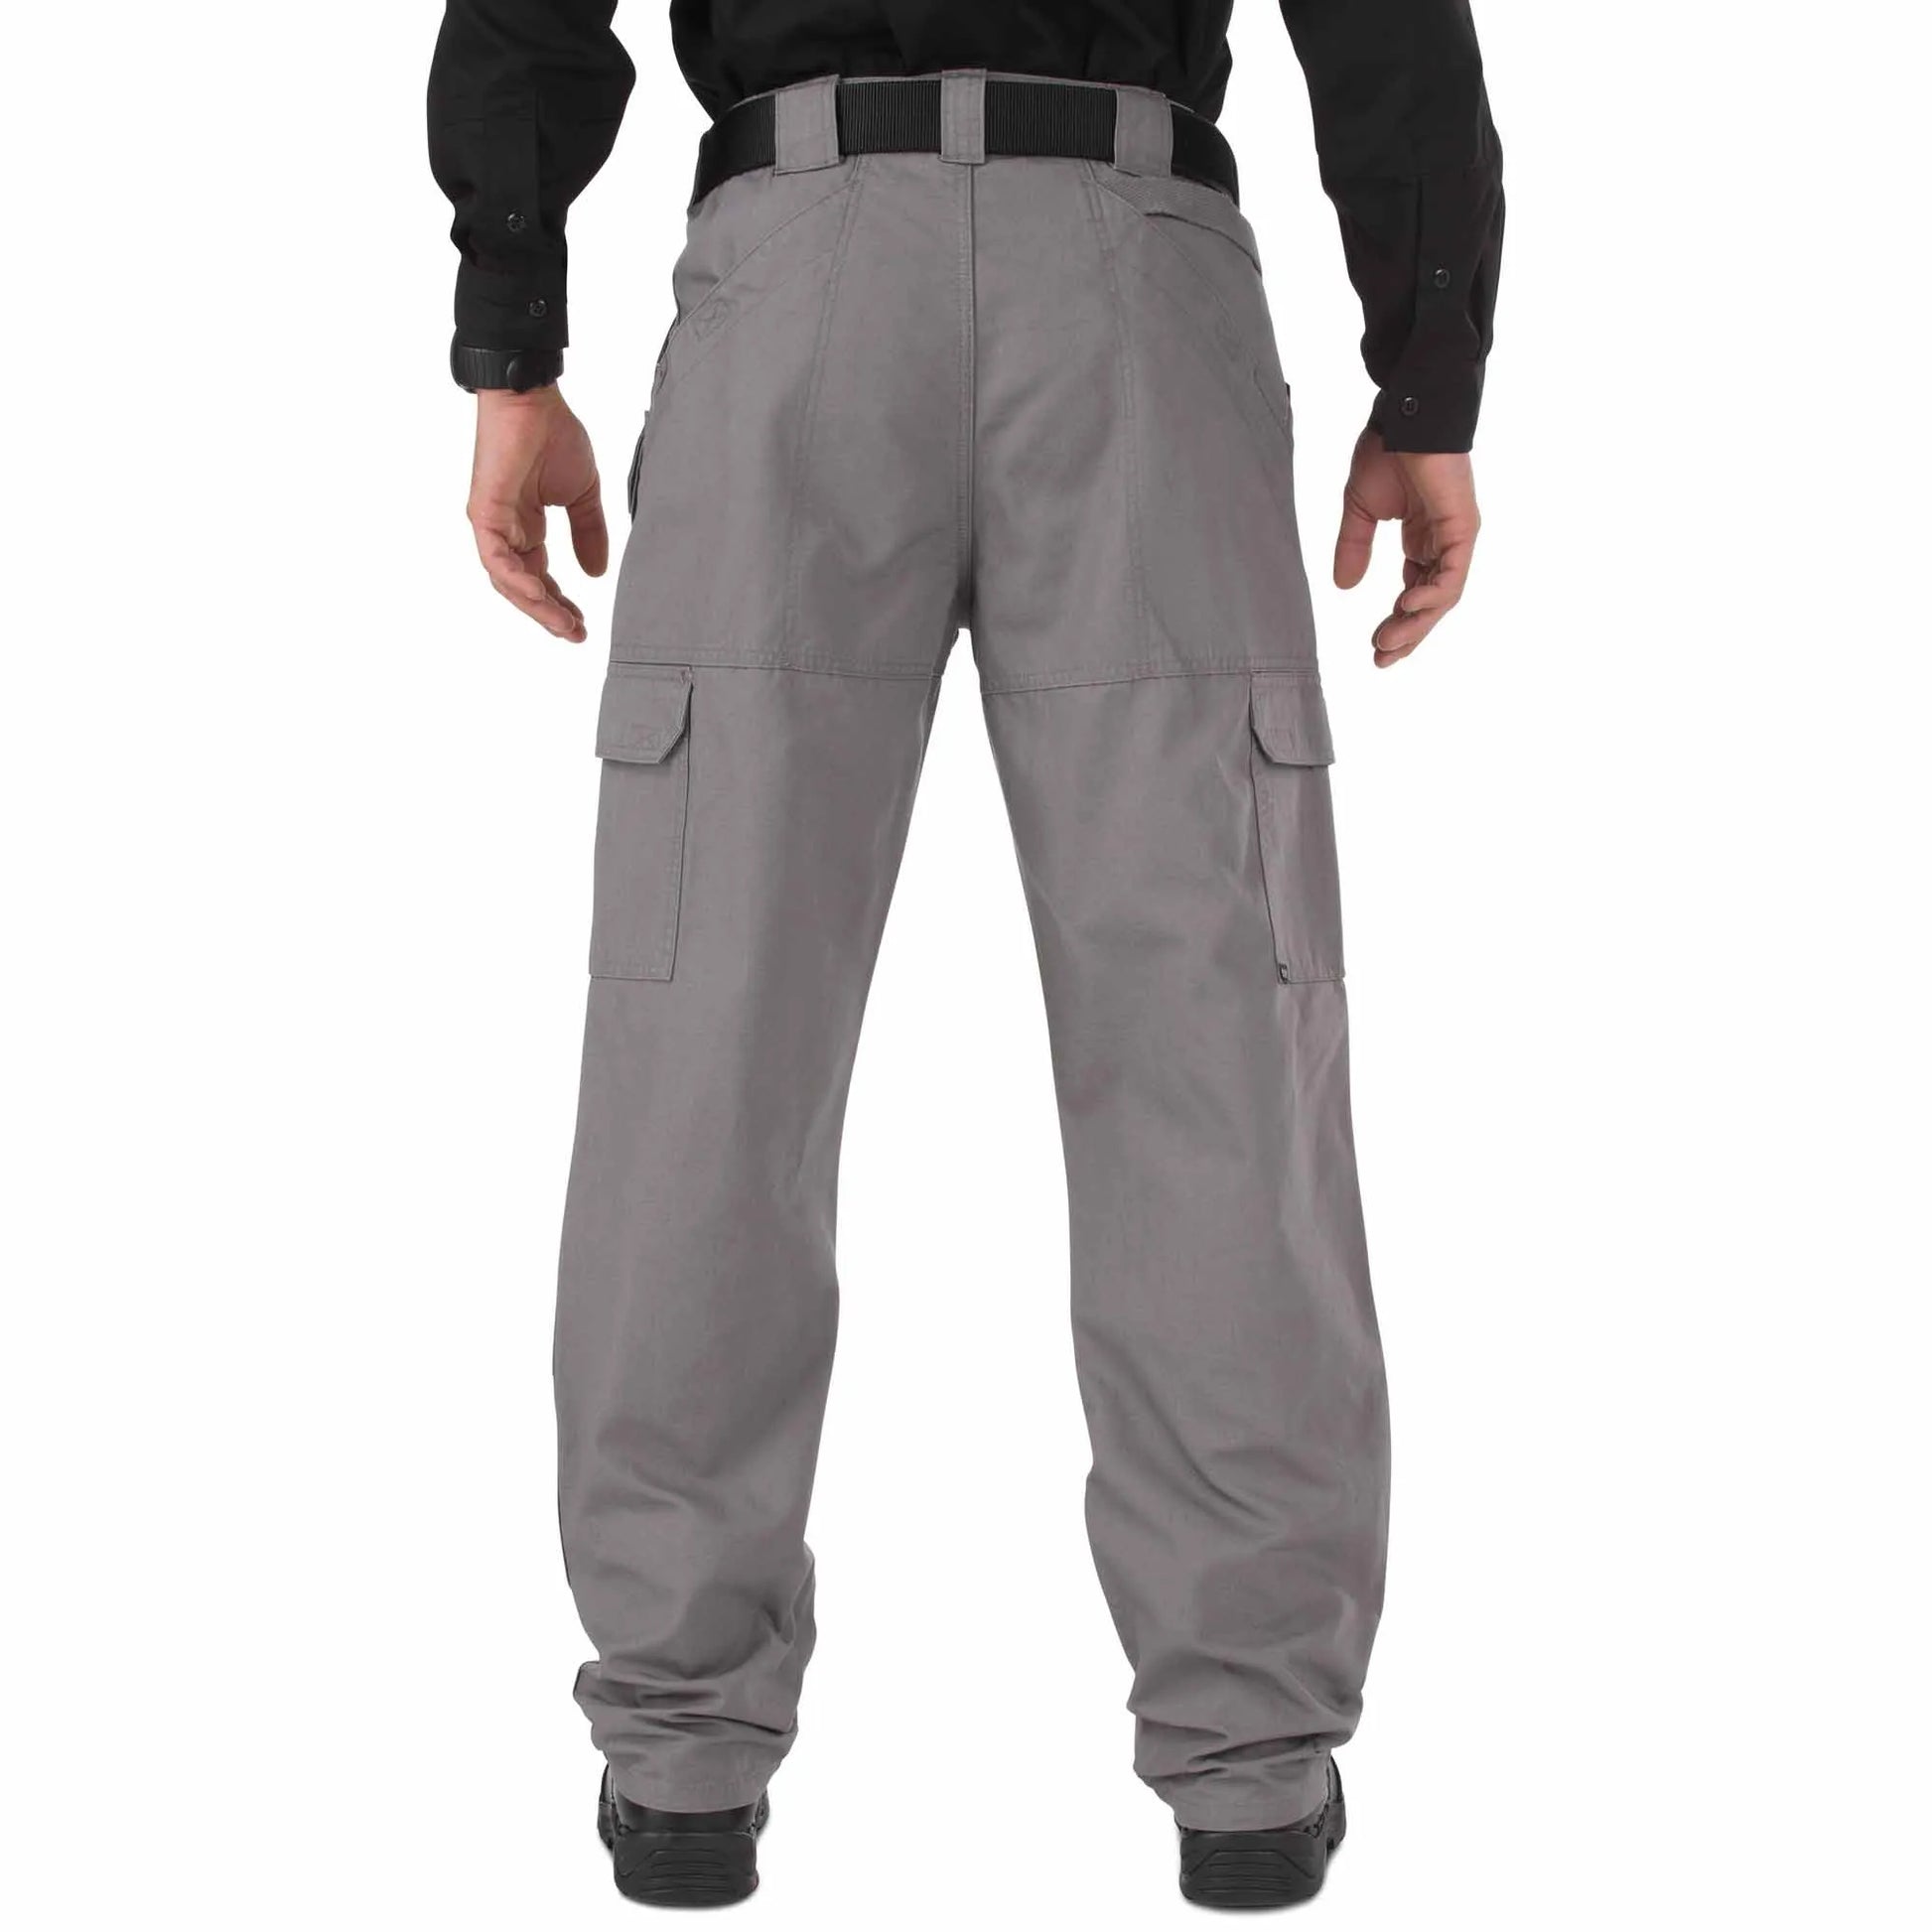 5.11 Tactical Cotton Canvas Pant – Army Navy Marine Store